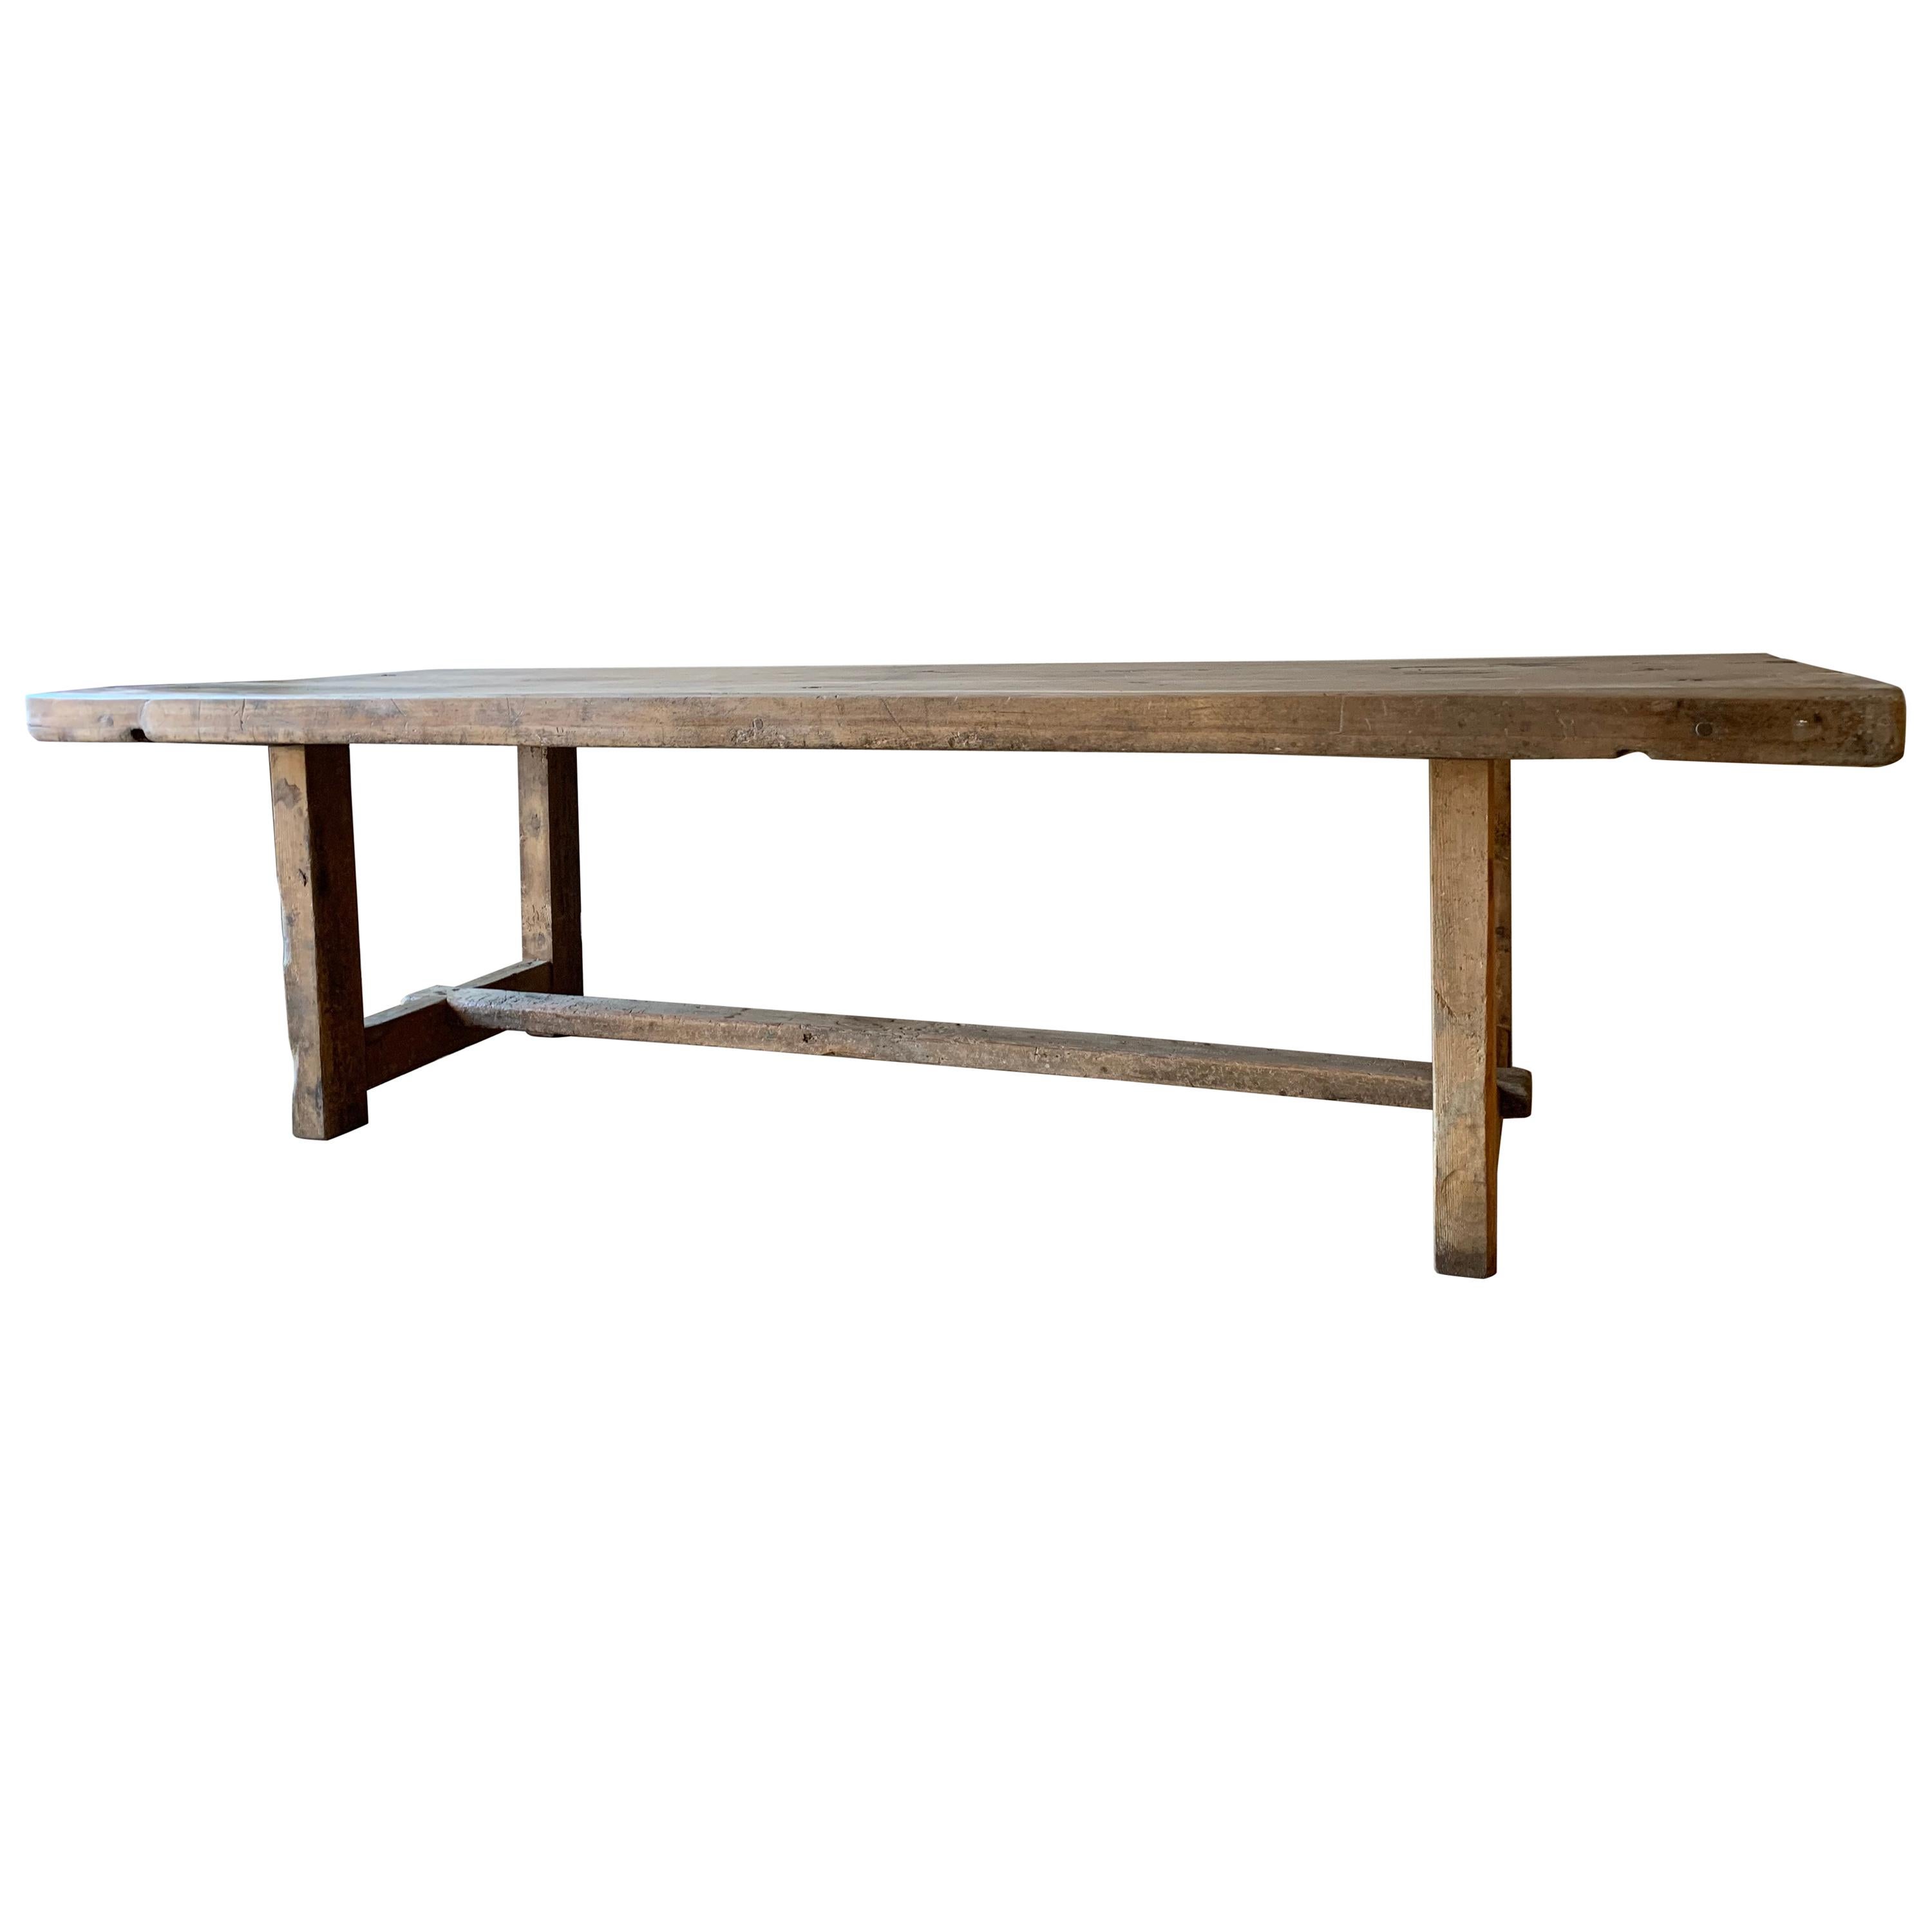 Large 19th Century Refectory Table